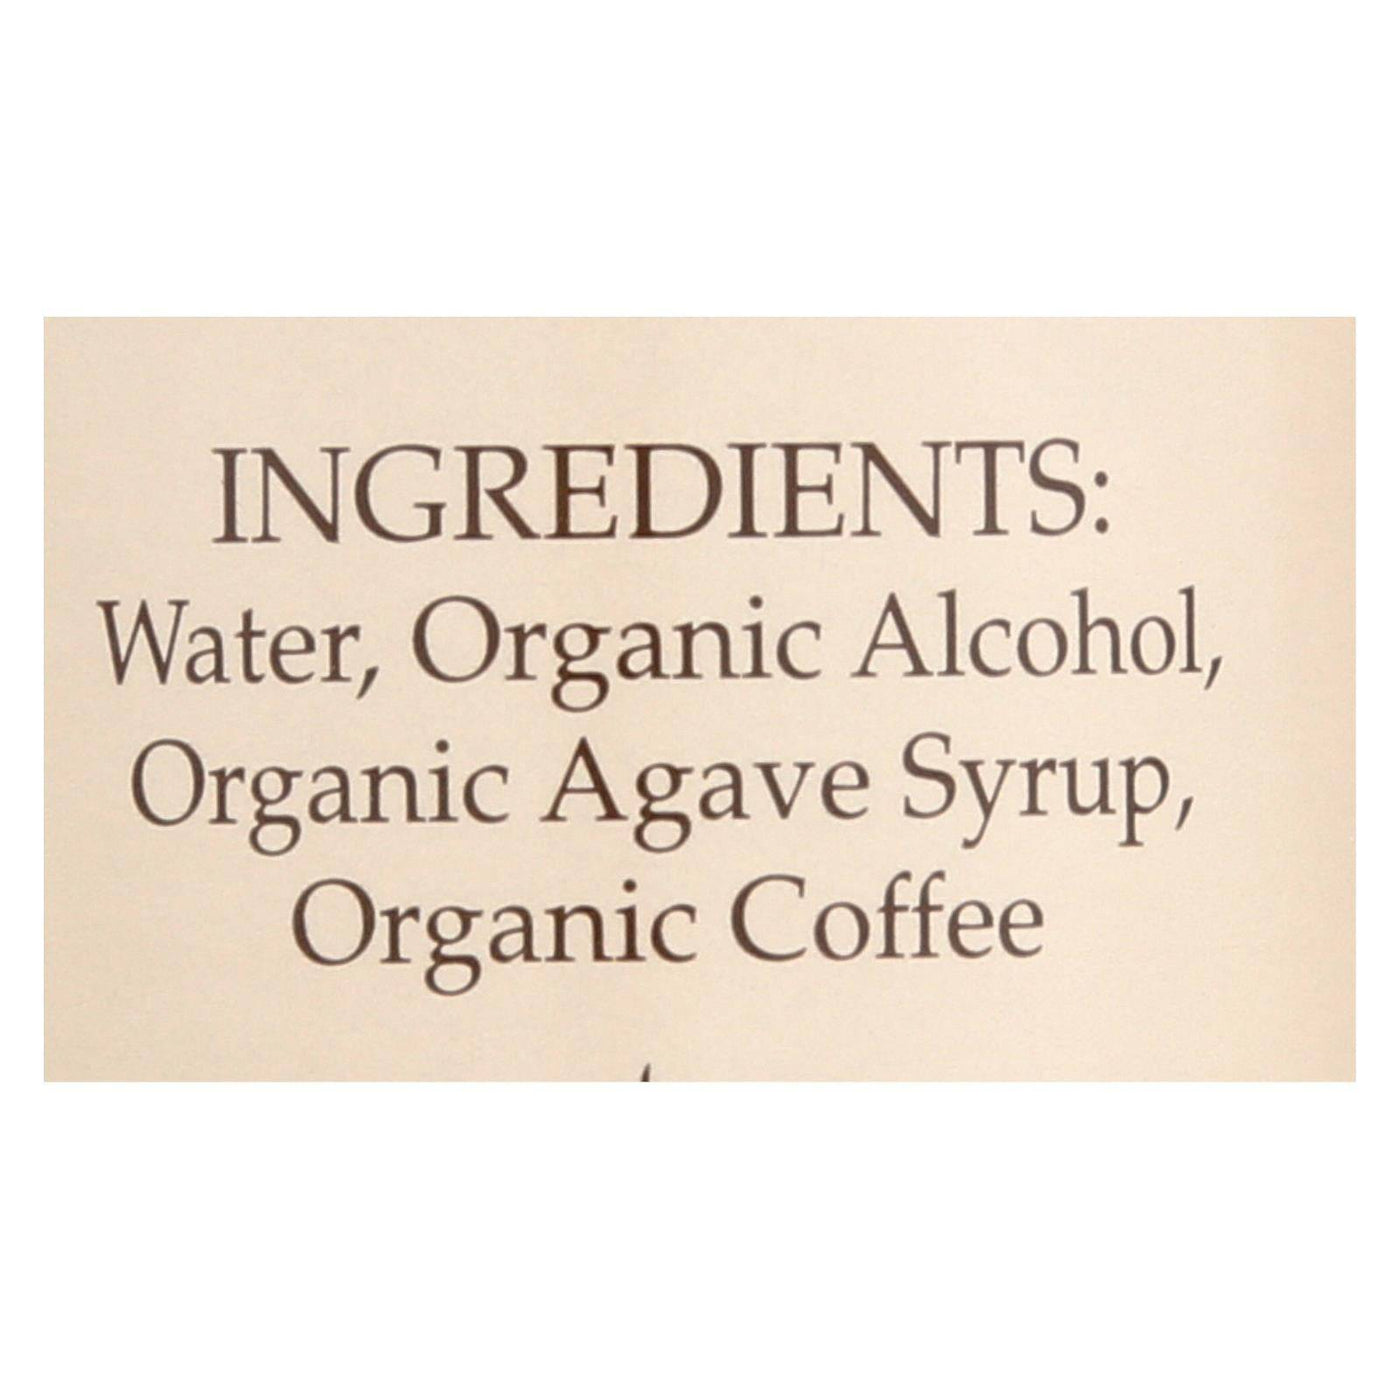 Buy Flavorganics Organic Coffee Extract - 2 Oz  at OnlyNaturals.us